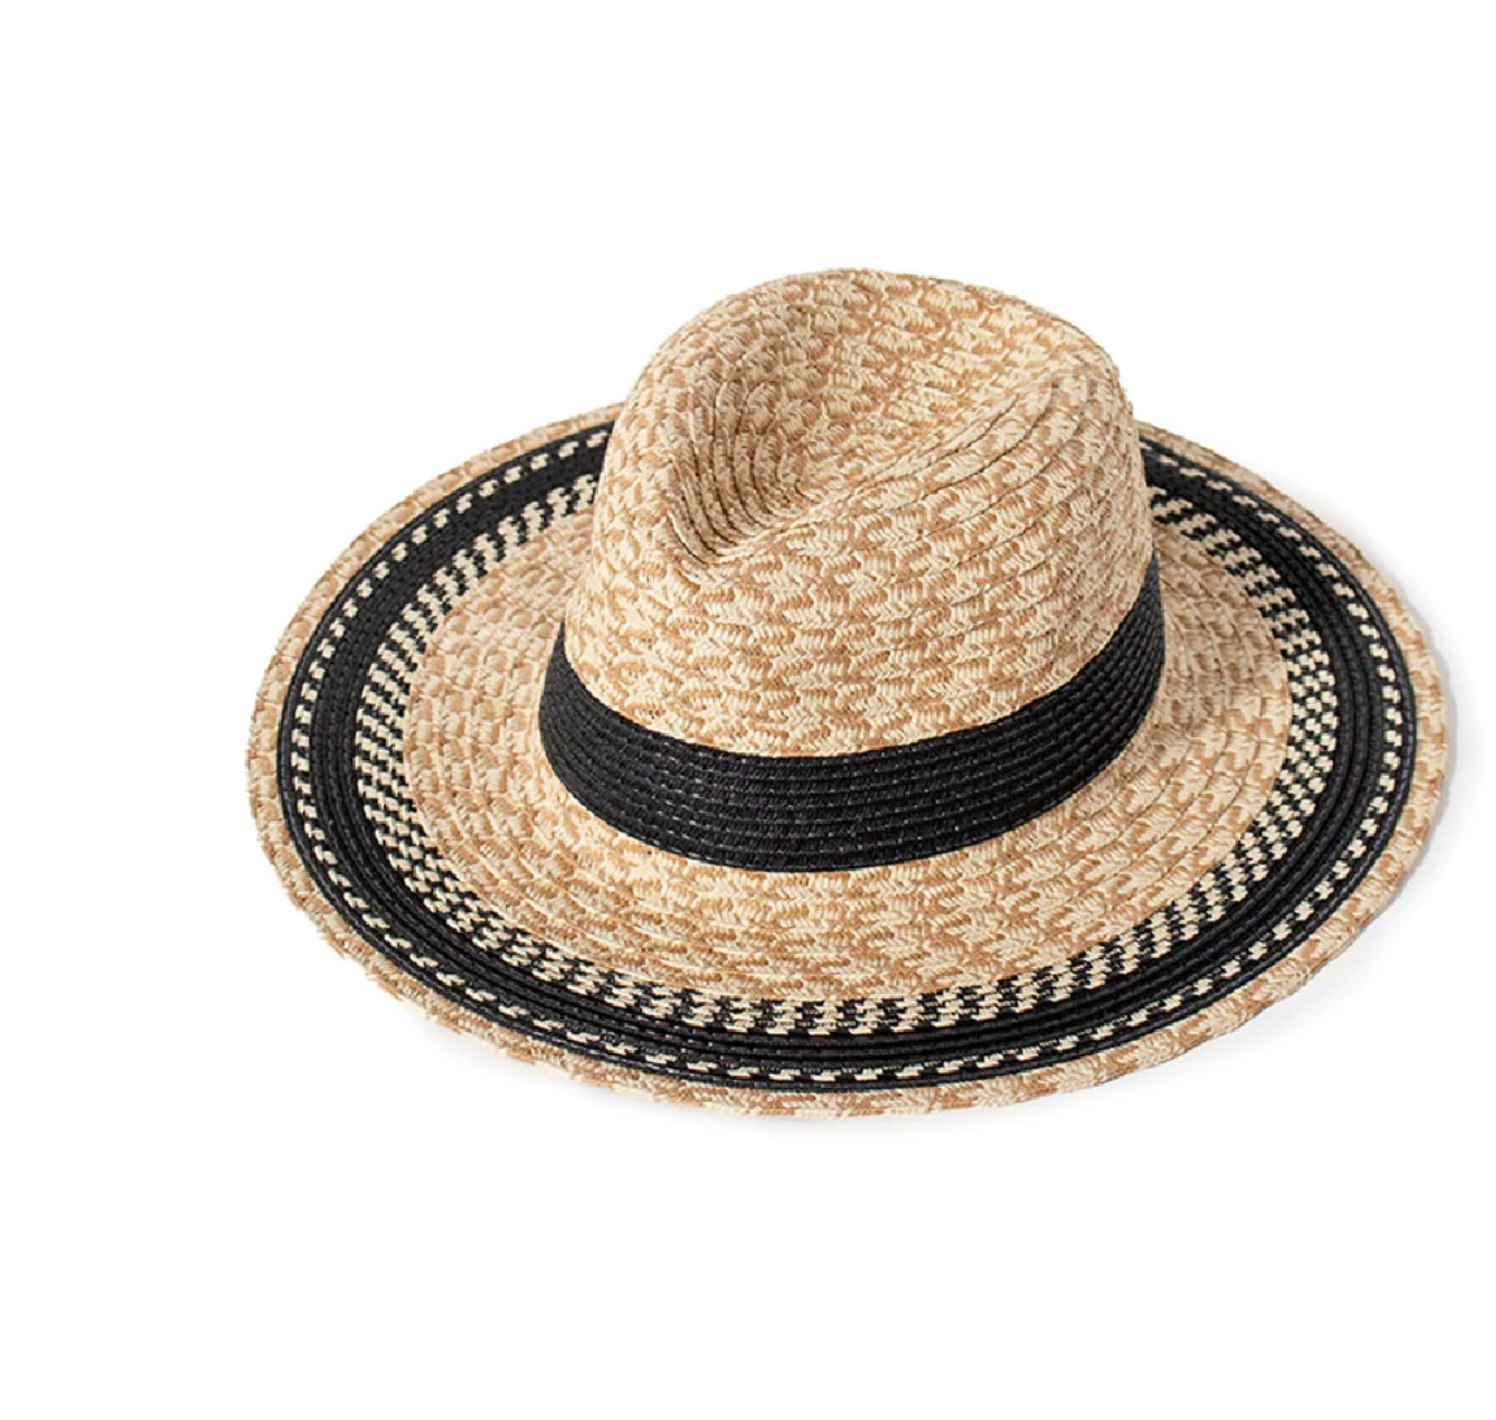 Stylish and Fun Hats For Women